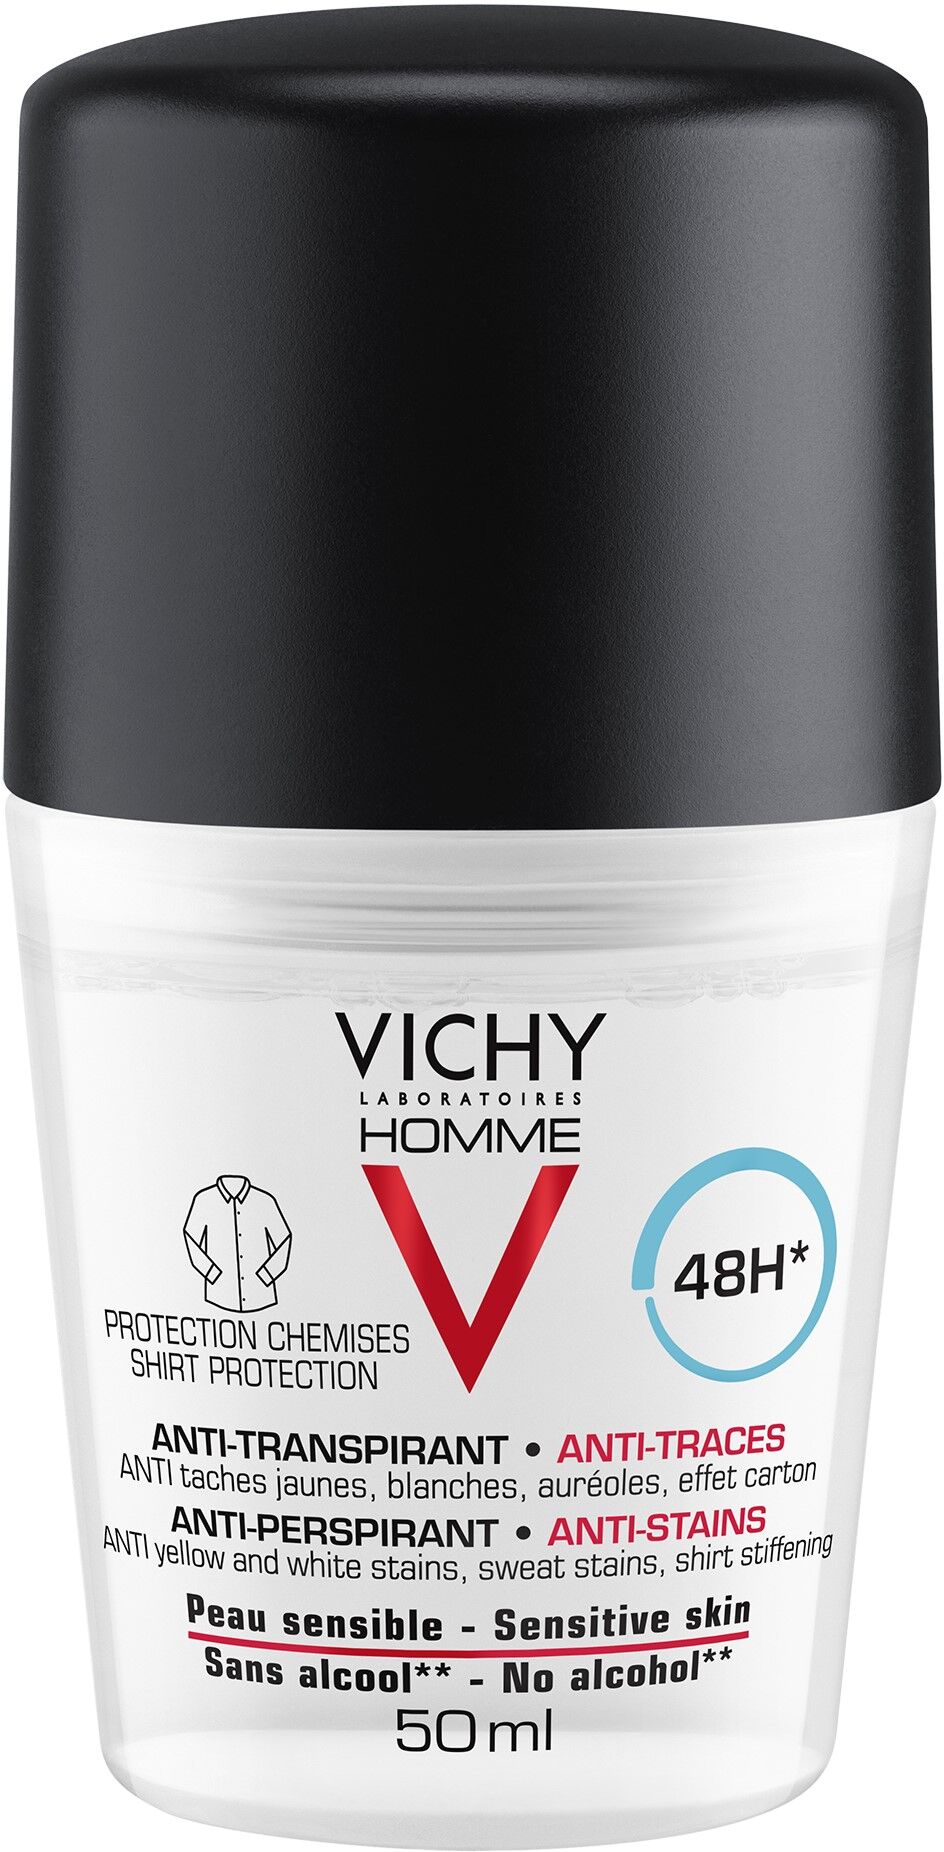 Vichy Homme Roll-On Antiperspirant Anti-Stains 48H